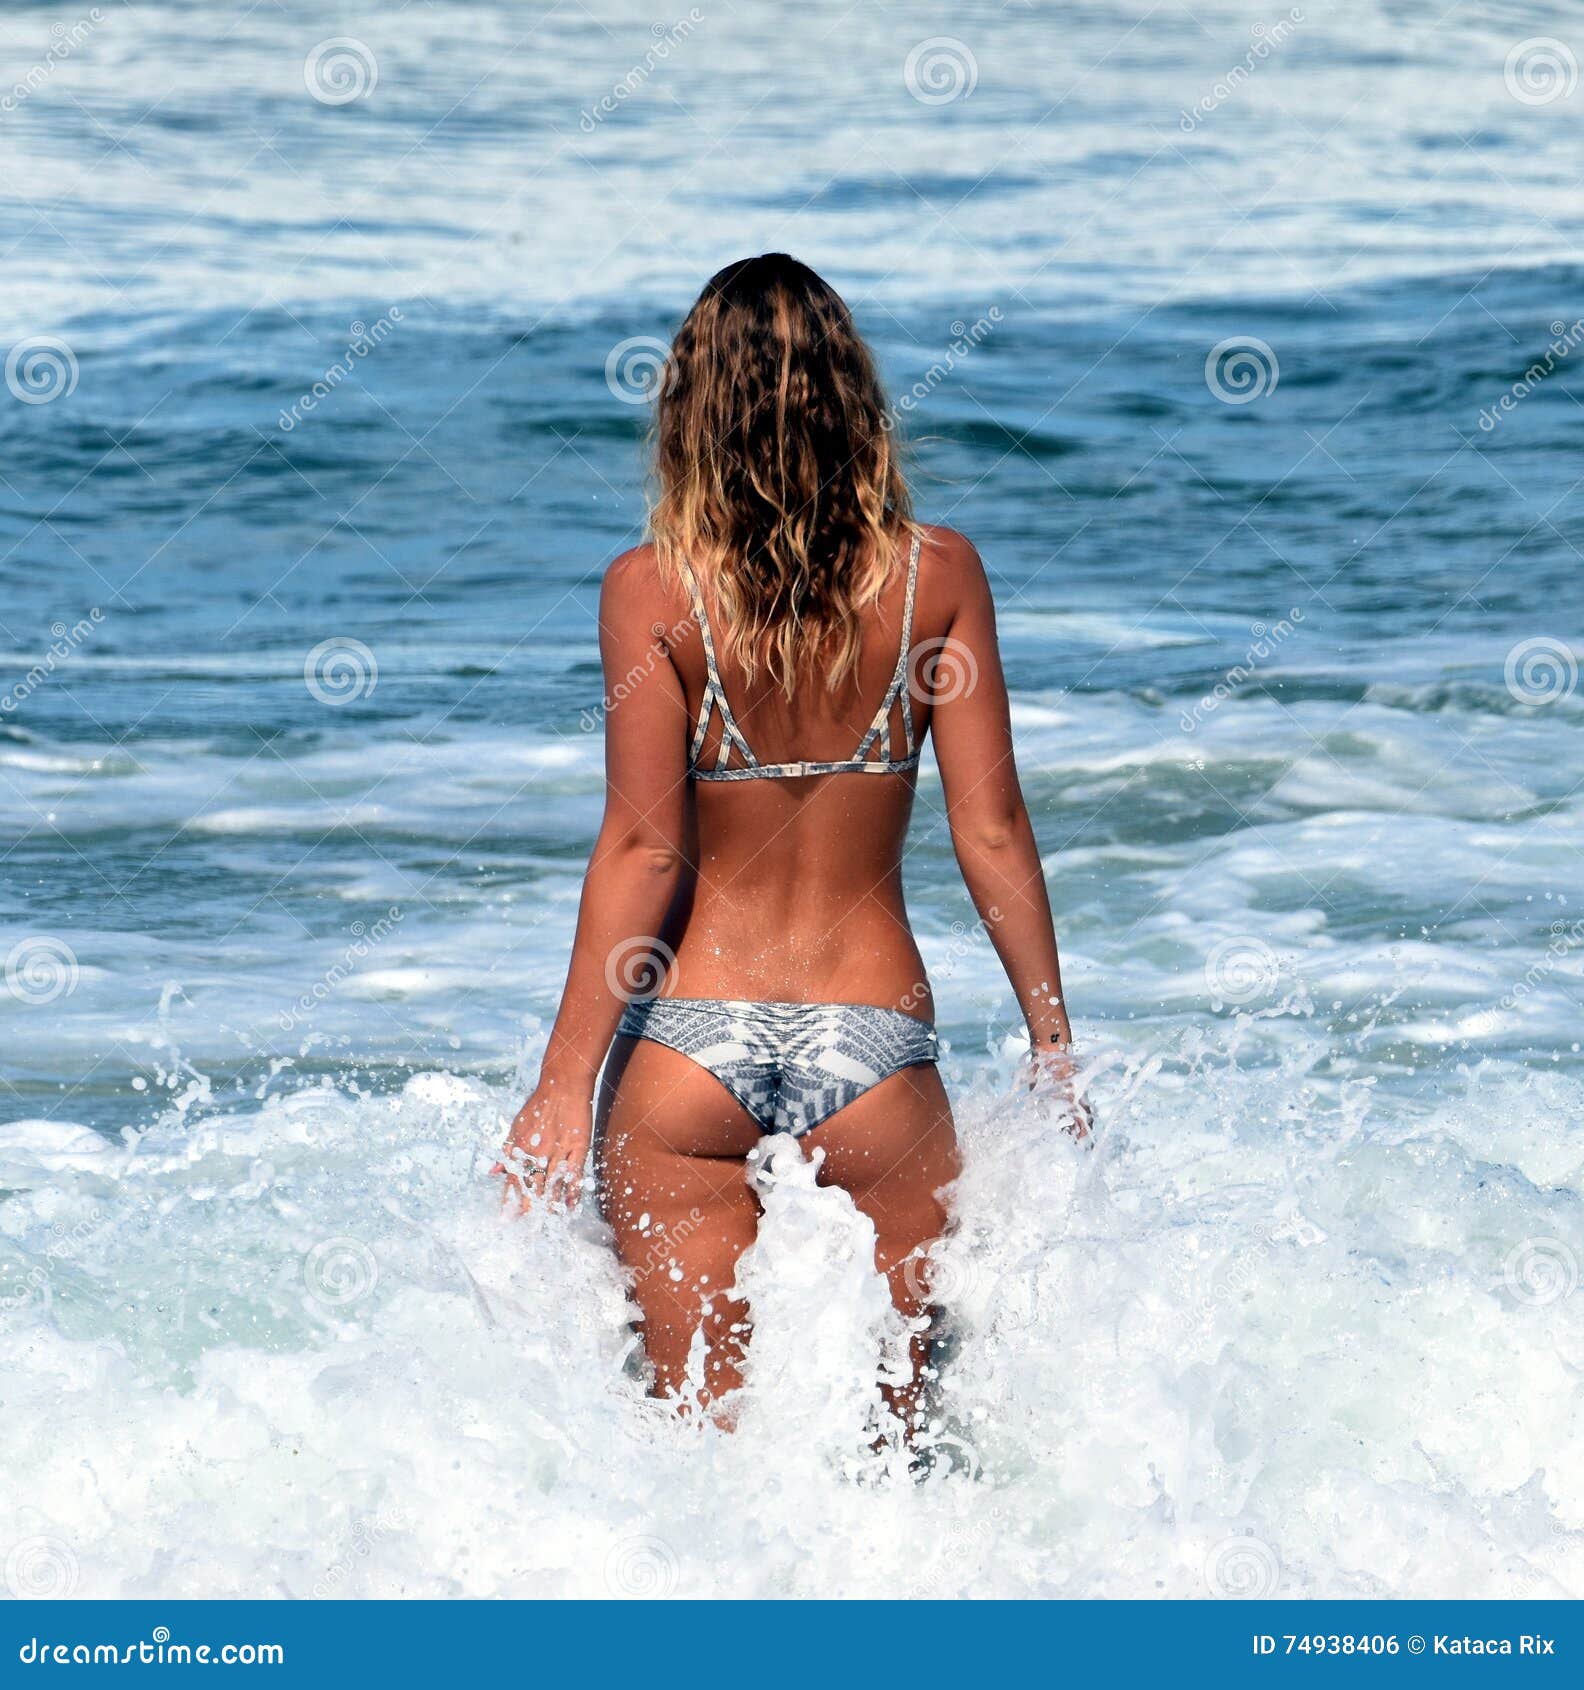 Girl enjoying the waves editorial photo picture